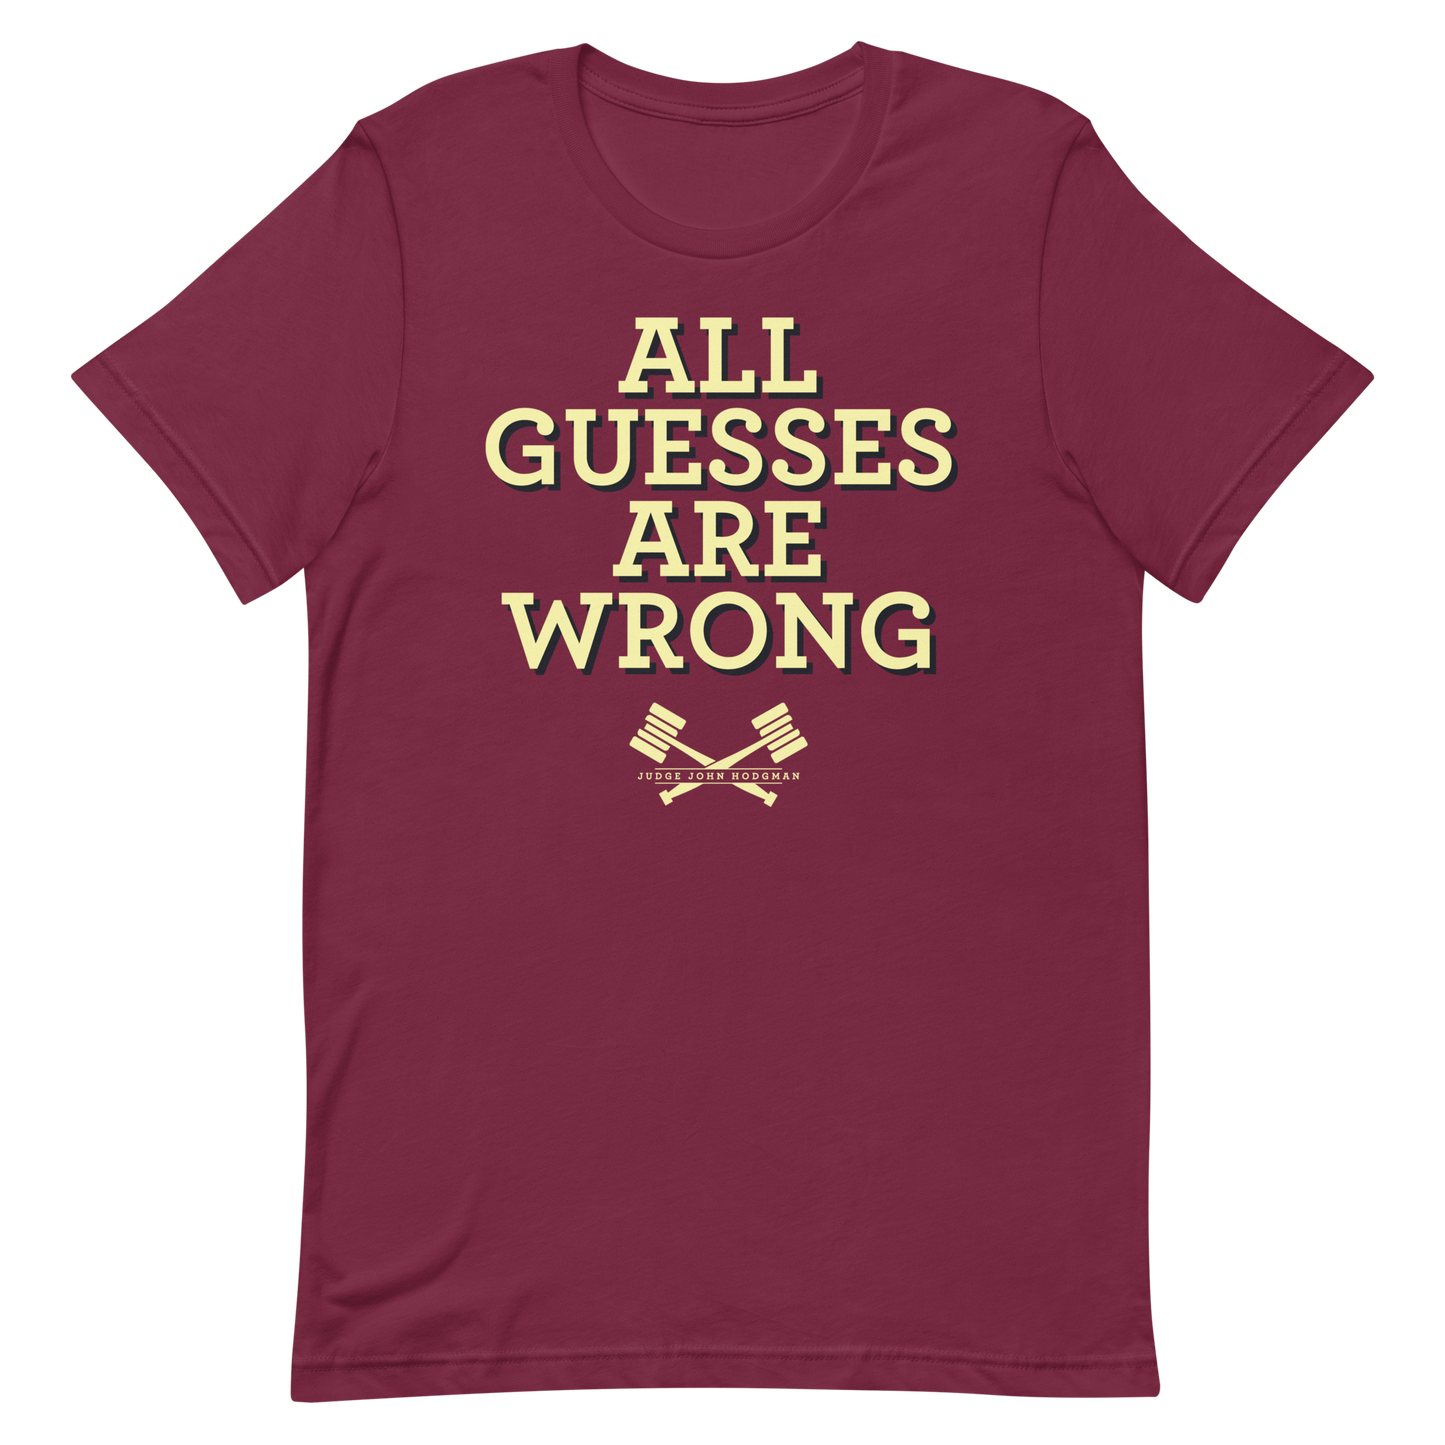 All Guesses Are Wrong T-shirt